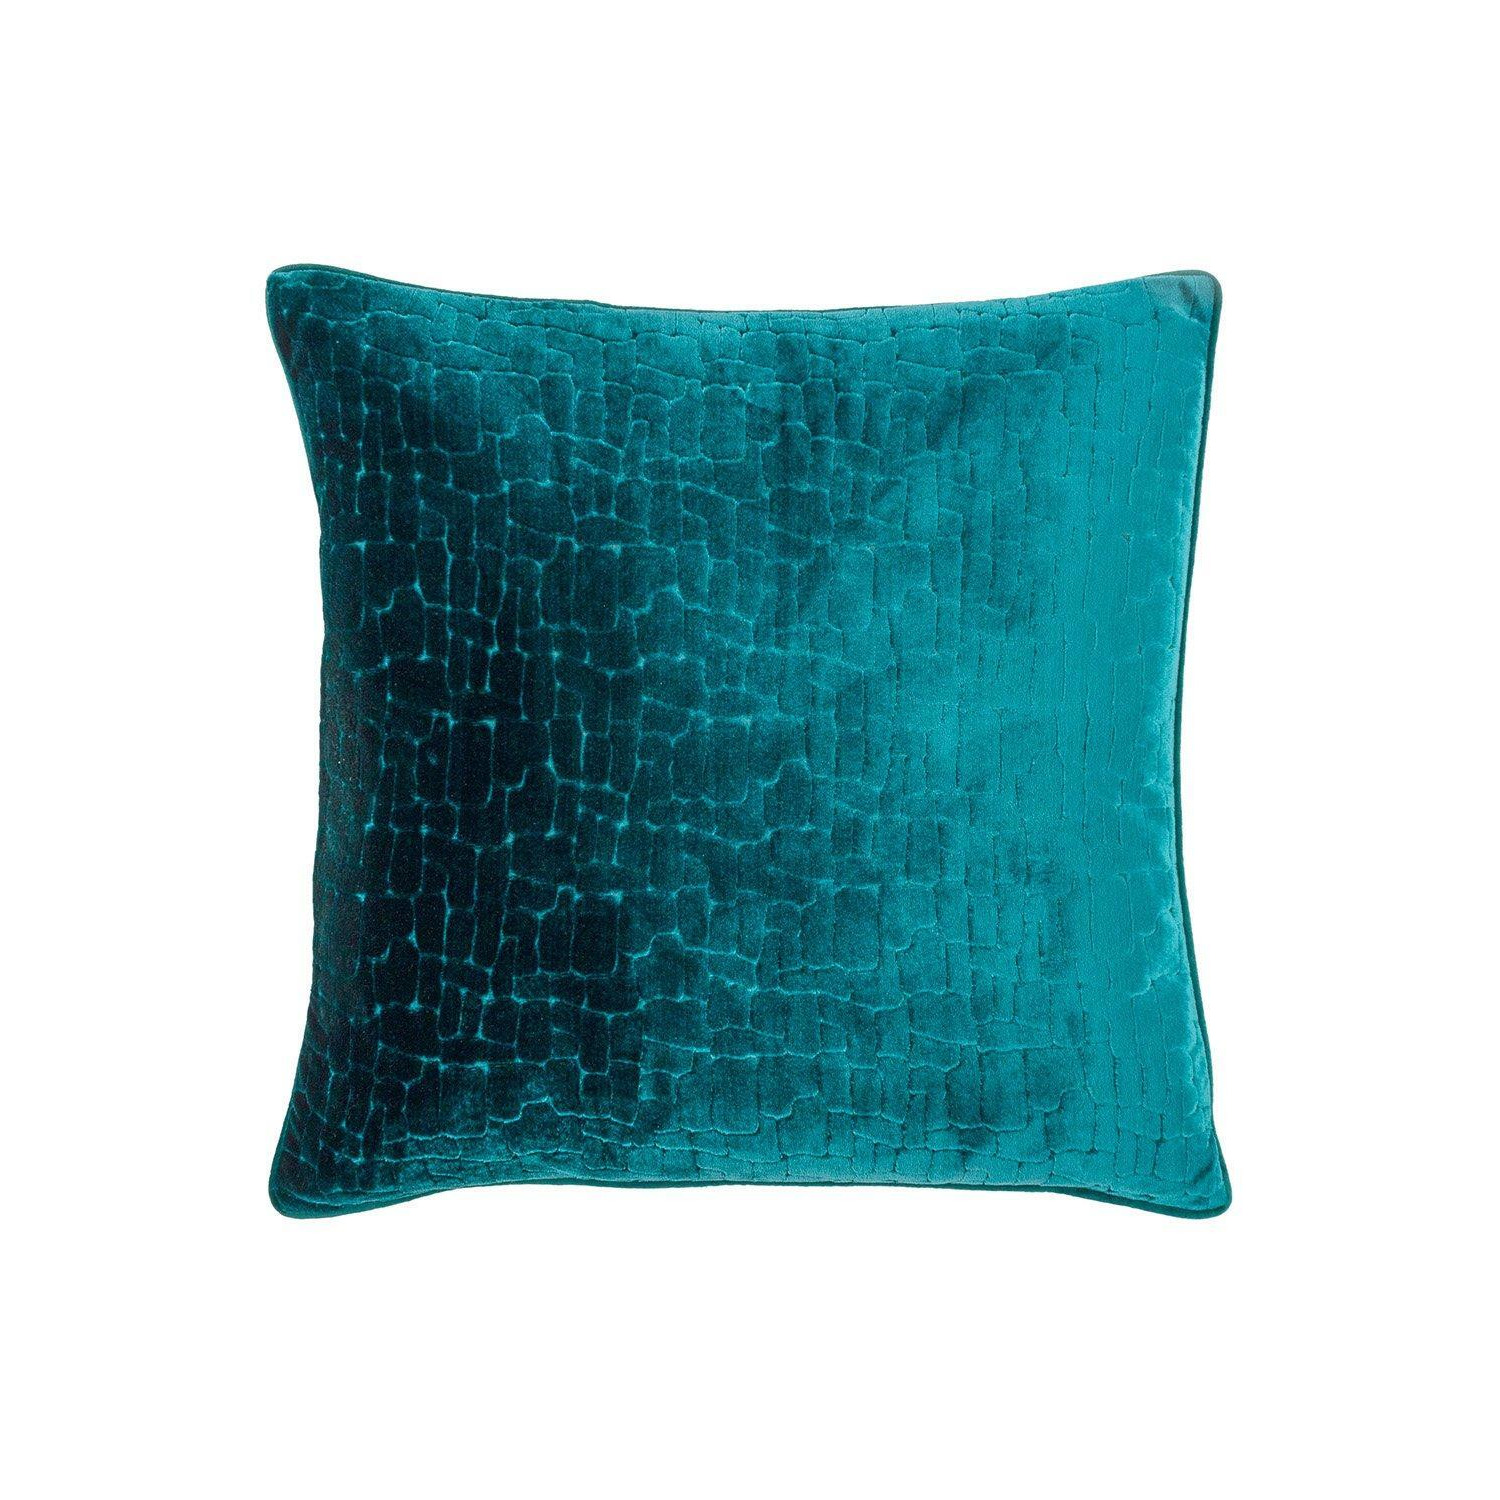 Bloomsbury Soft Cut Velvet Piped Cushion - image 1